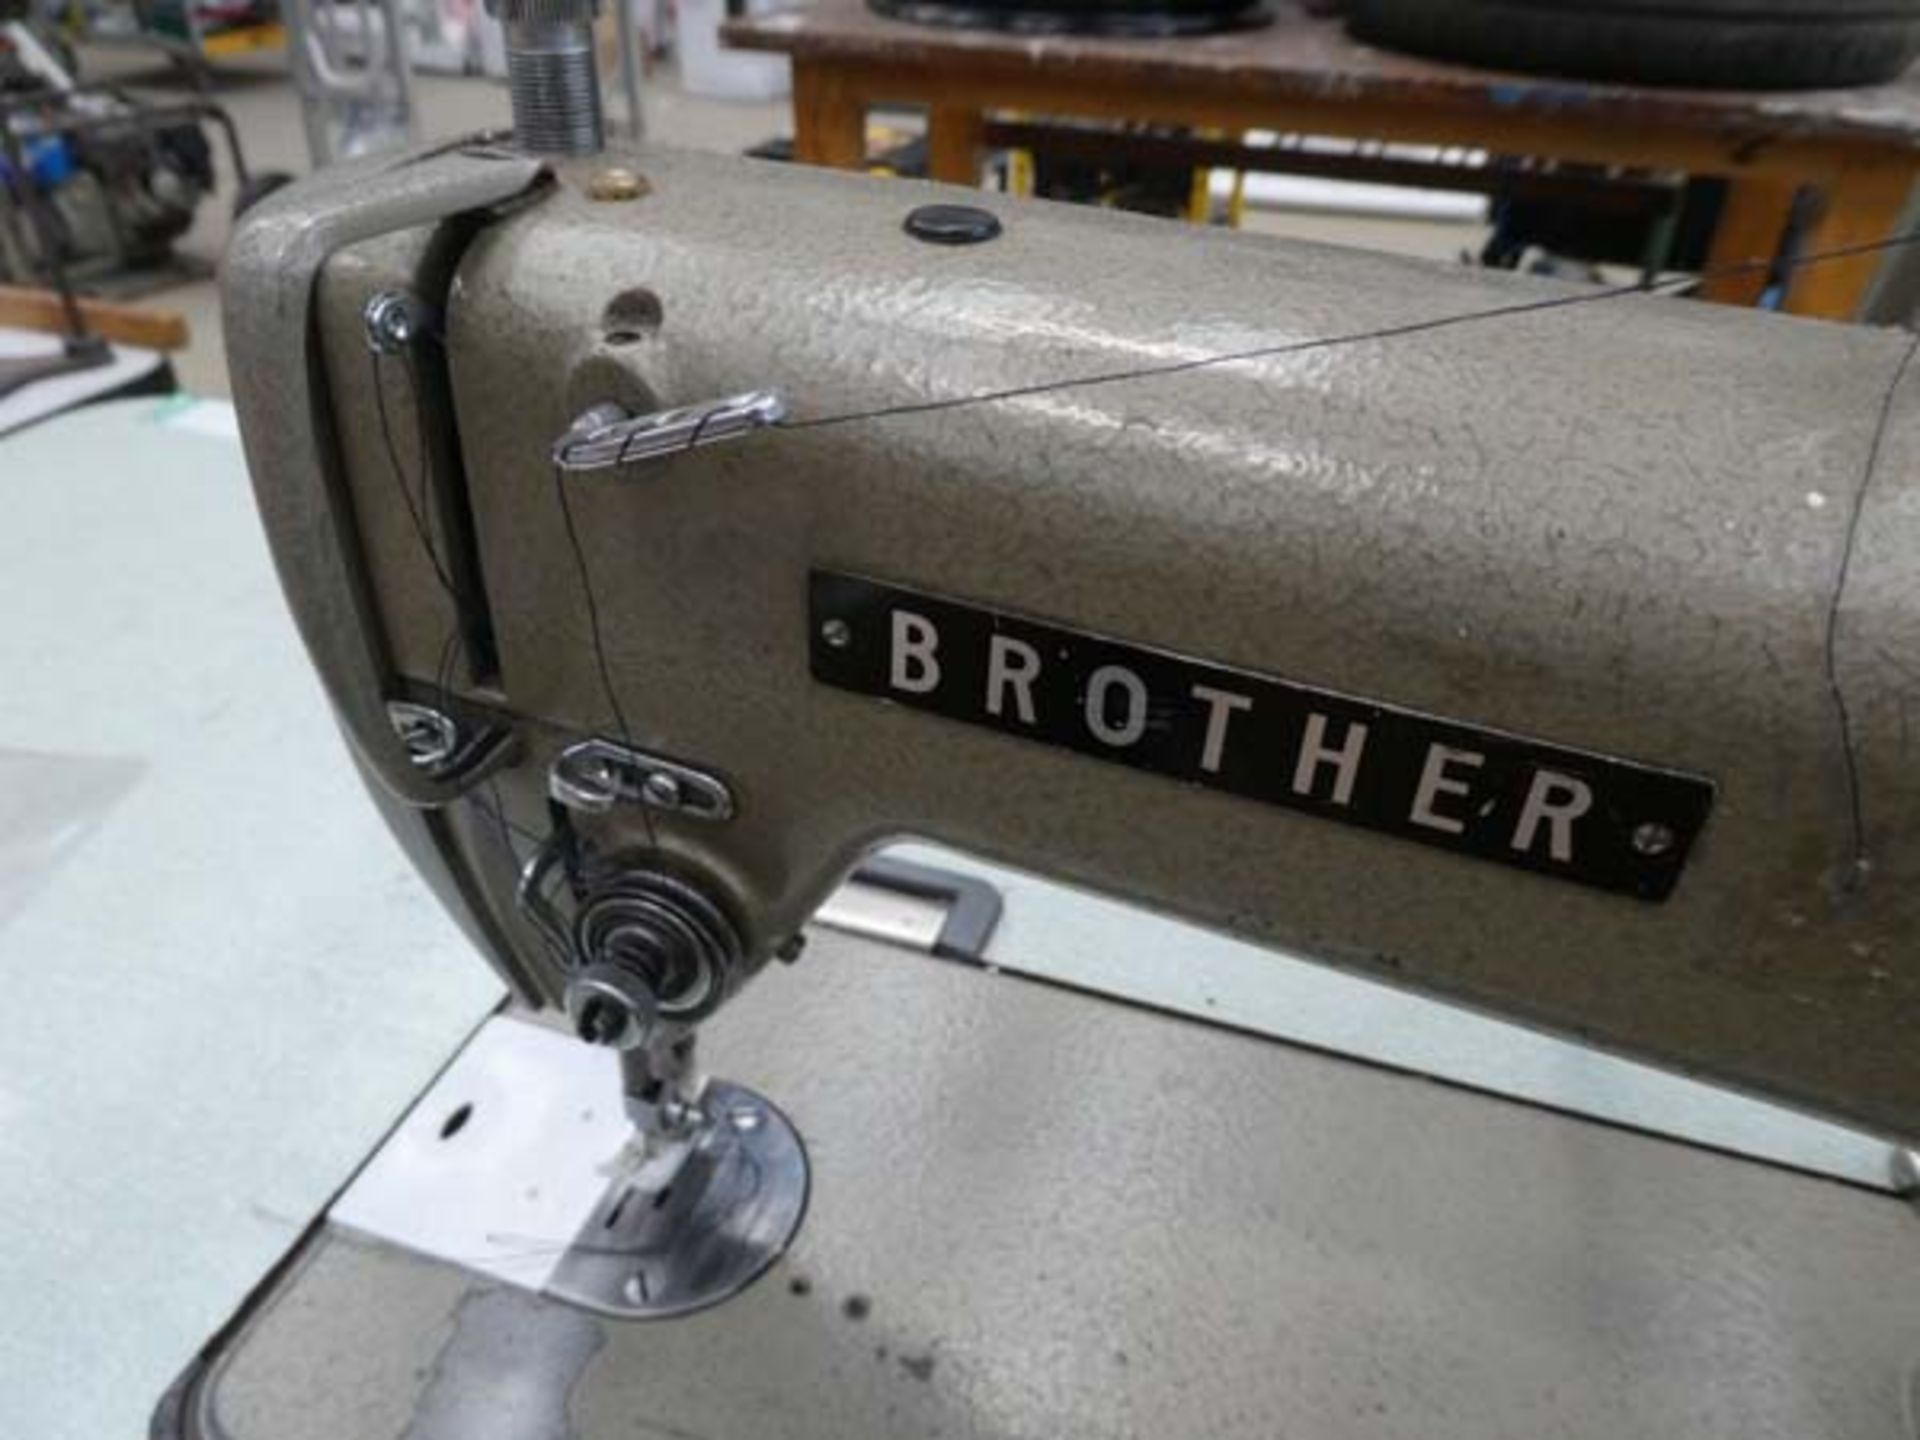 Brother industrial style sewing machine - Image 5 of 5